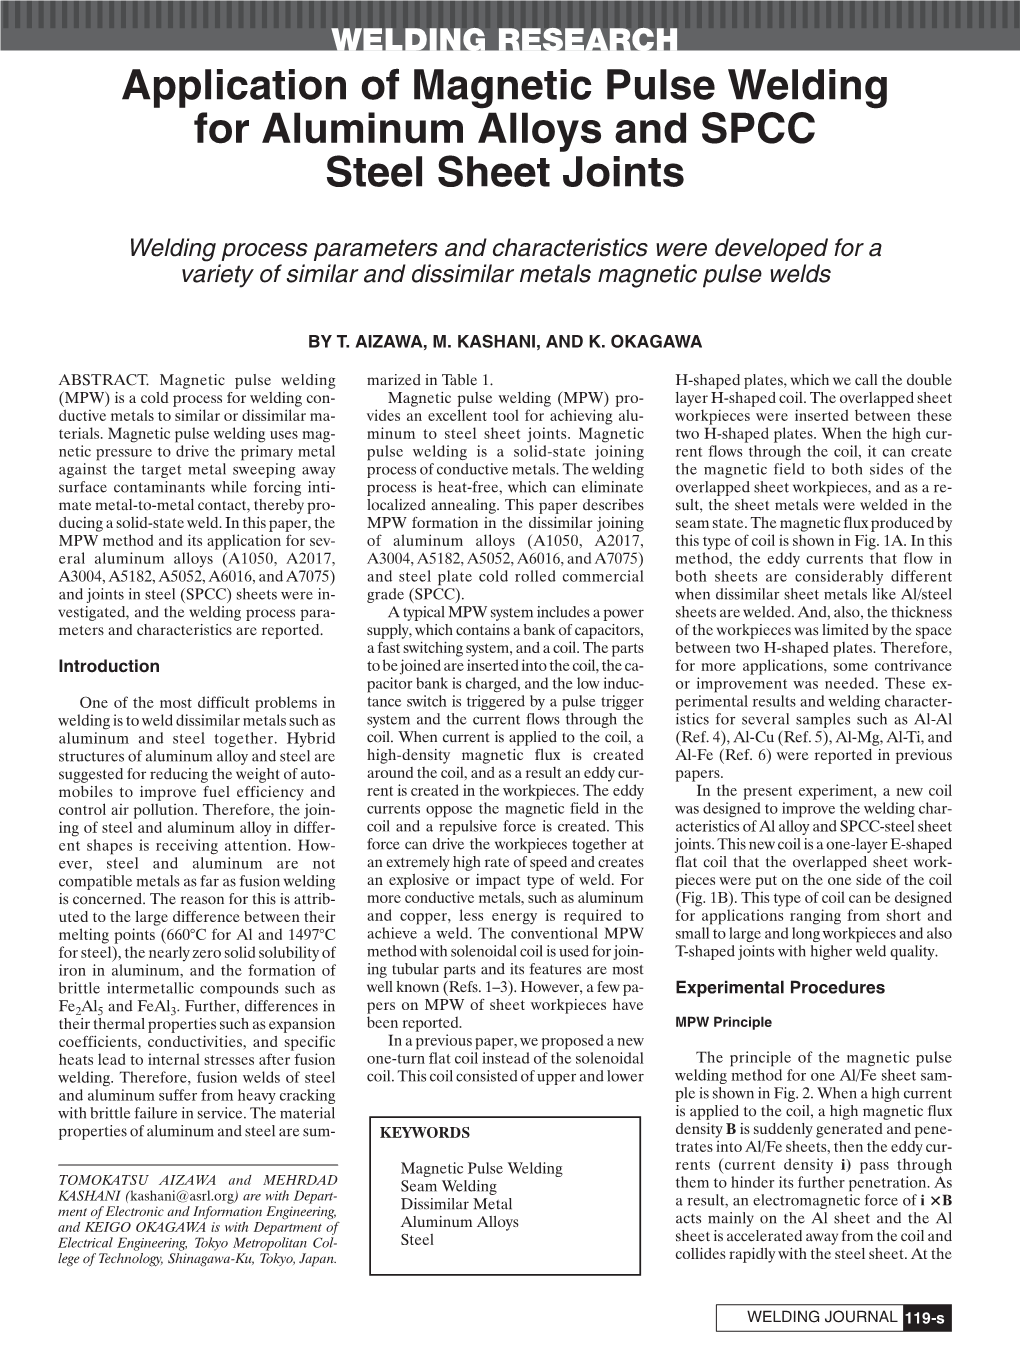 Application of Magnetic Pulse Welding for Aluminum Alloys and SPCC Steel Sheet Joints